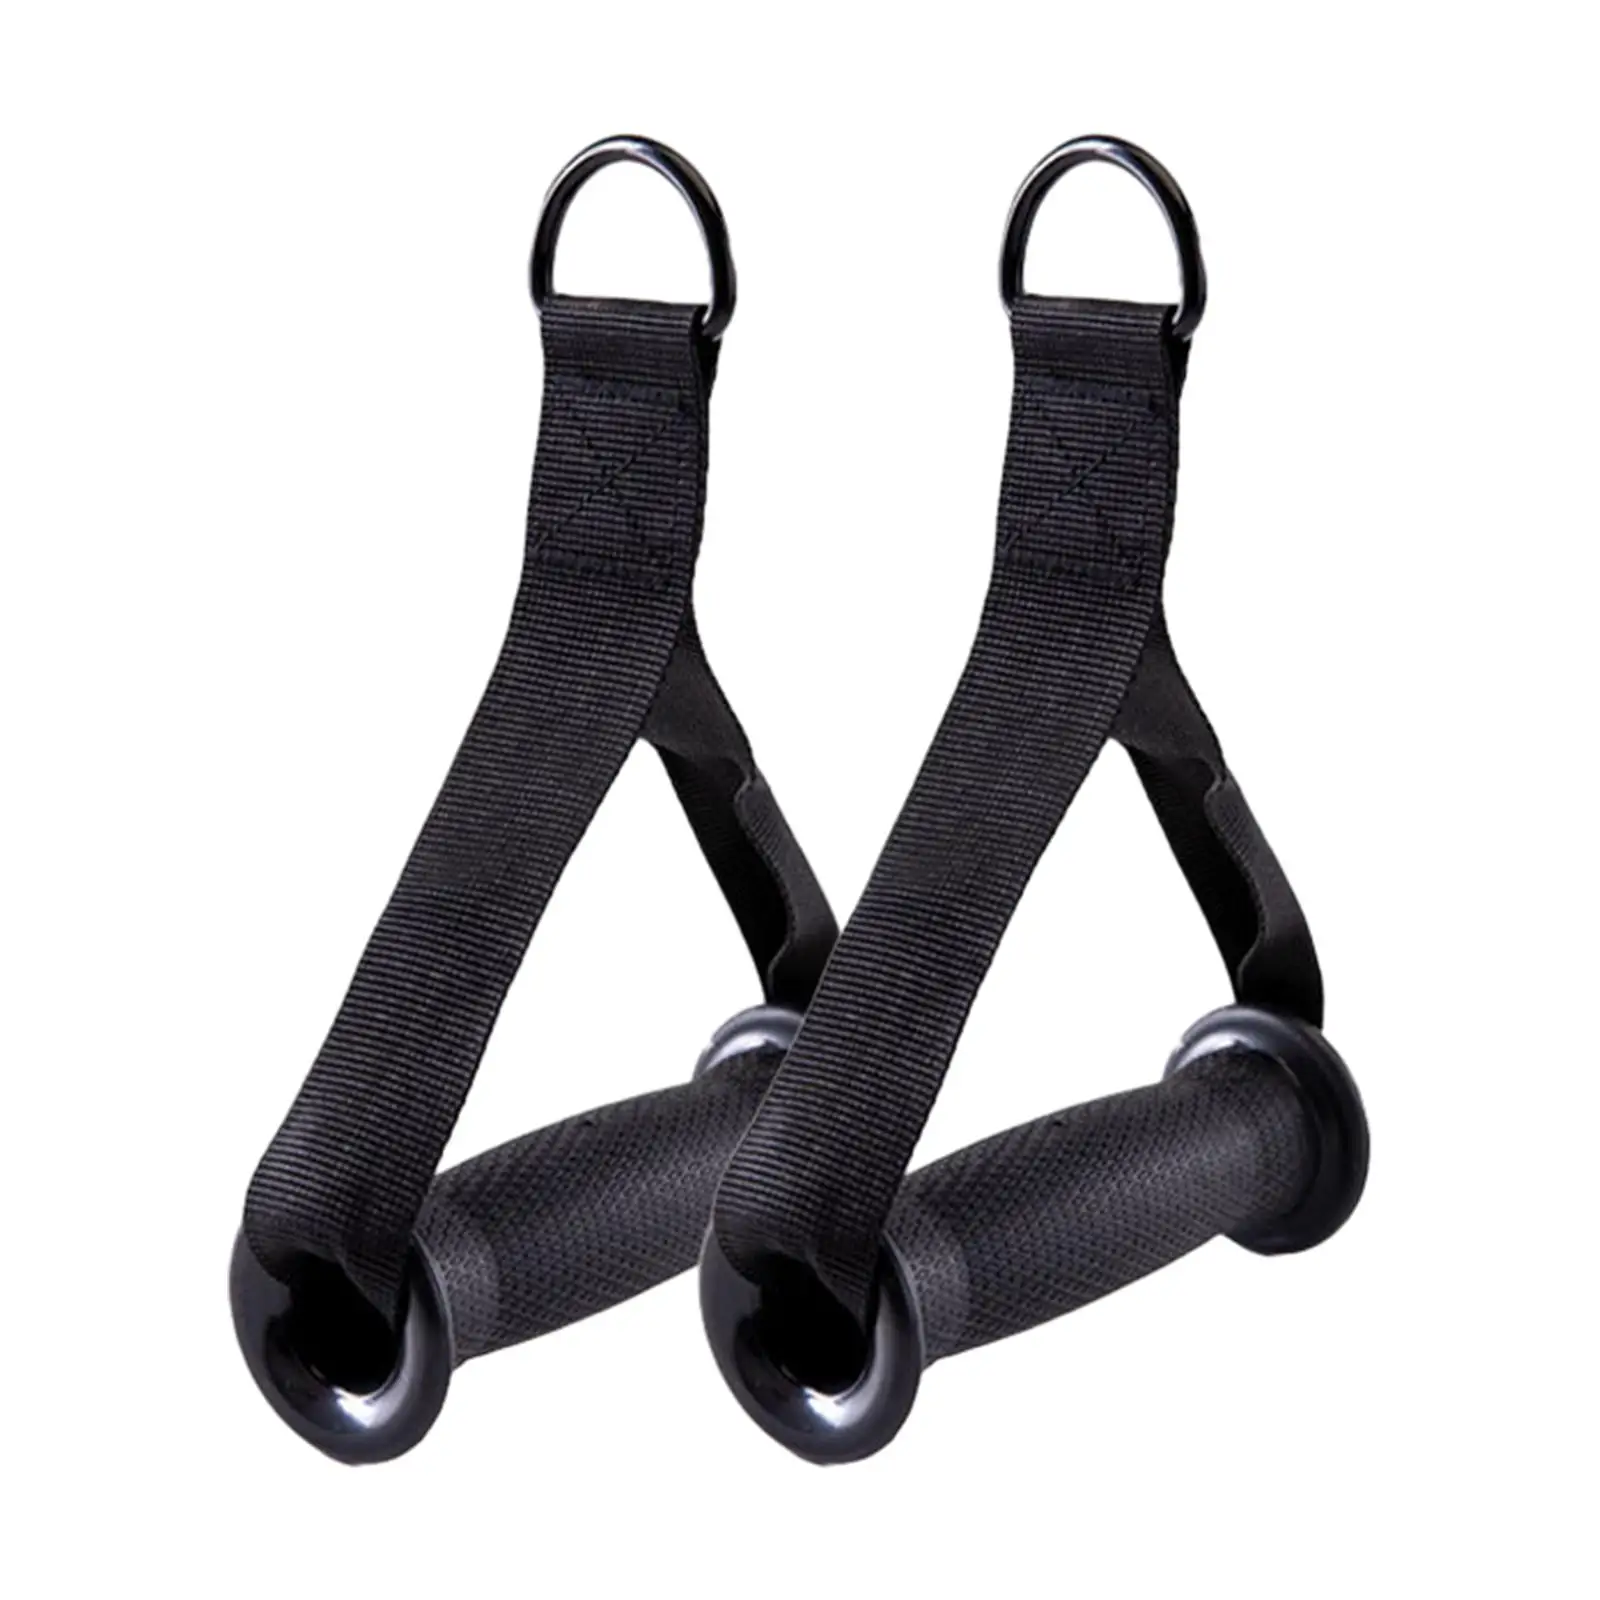 Cable Machine Handles Resistance Band Handles Grips for Fitness Equipment Working Out Pilates Weight Lifting Pulley System